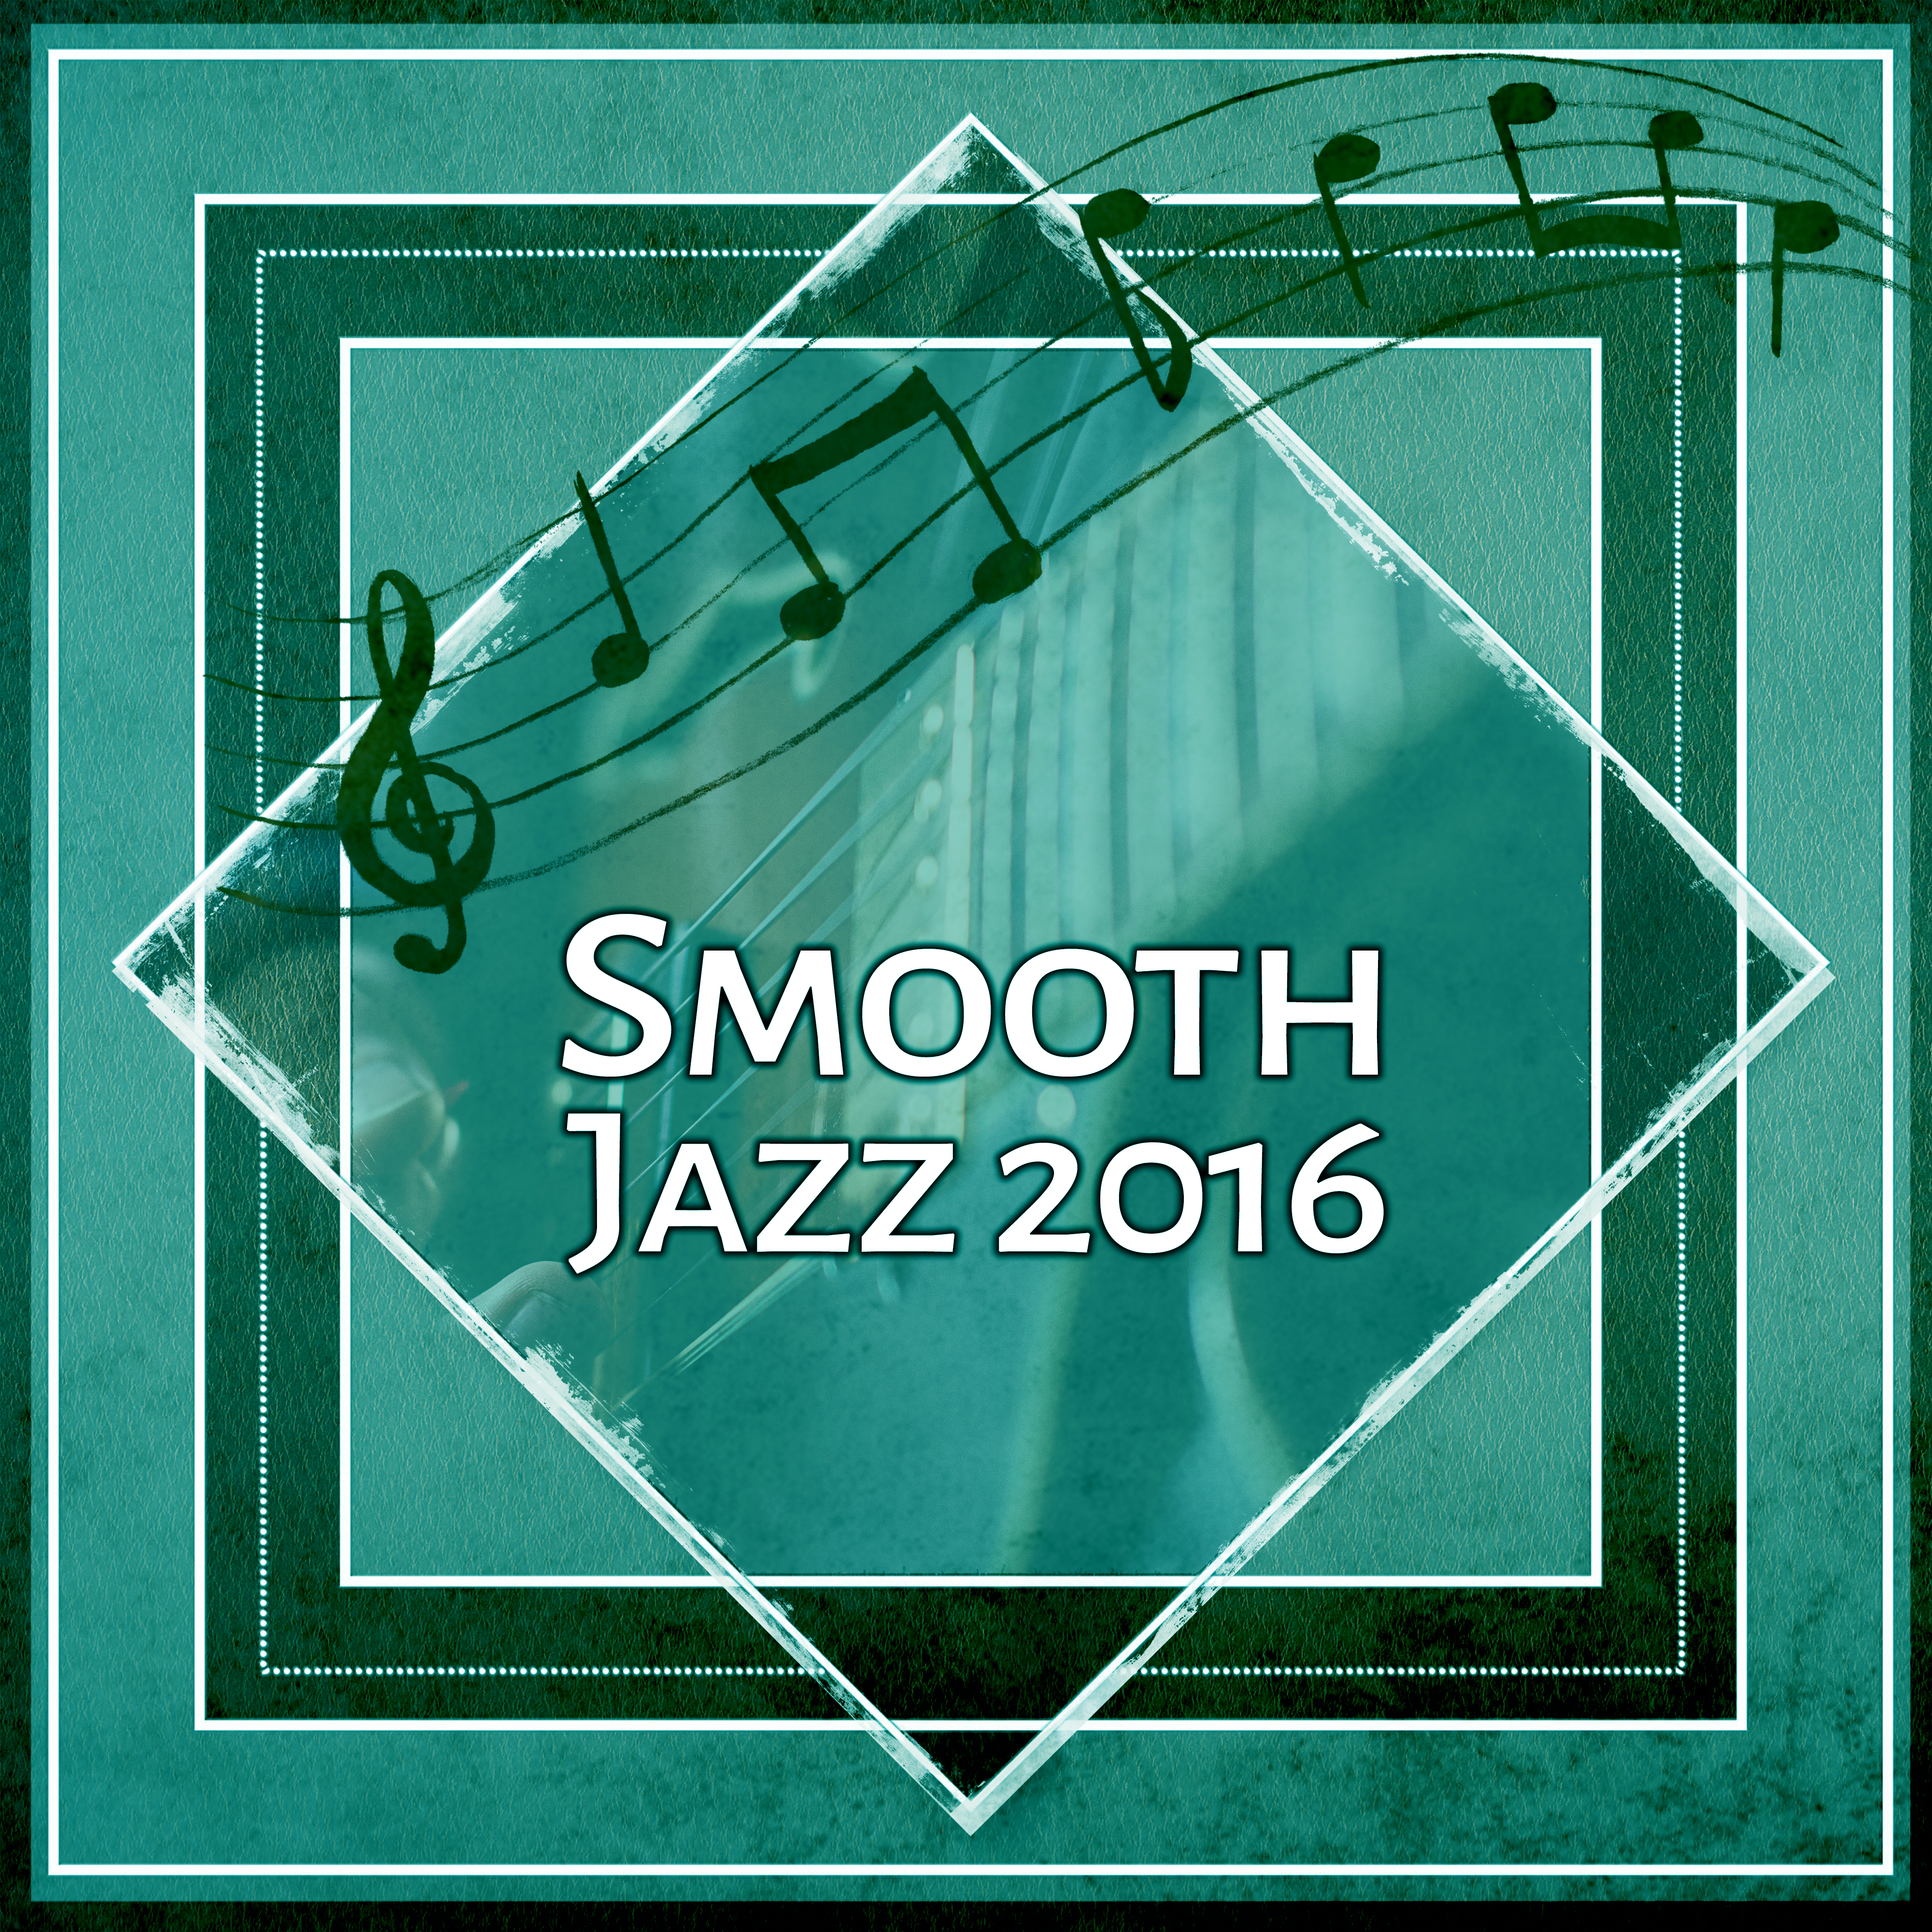 Smooth Jazz 2016  Most Smooth Jazz Music, Piano Bar Jazz Lounge, Sentimental Mood, Dinner Party Time, Jazz Lounge